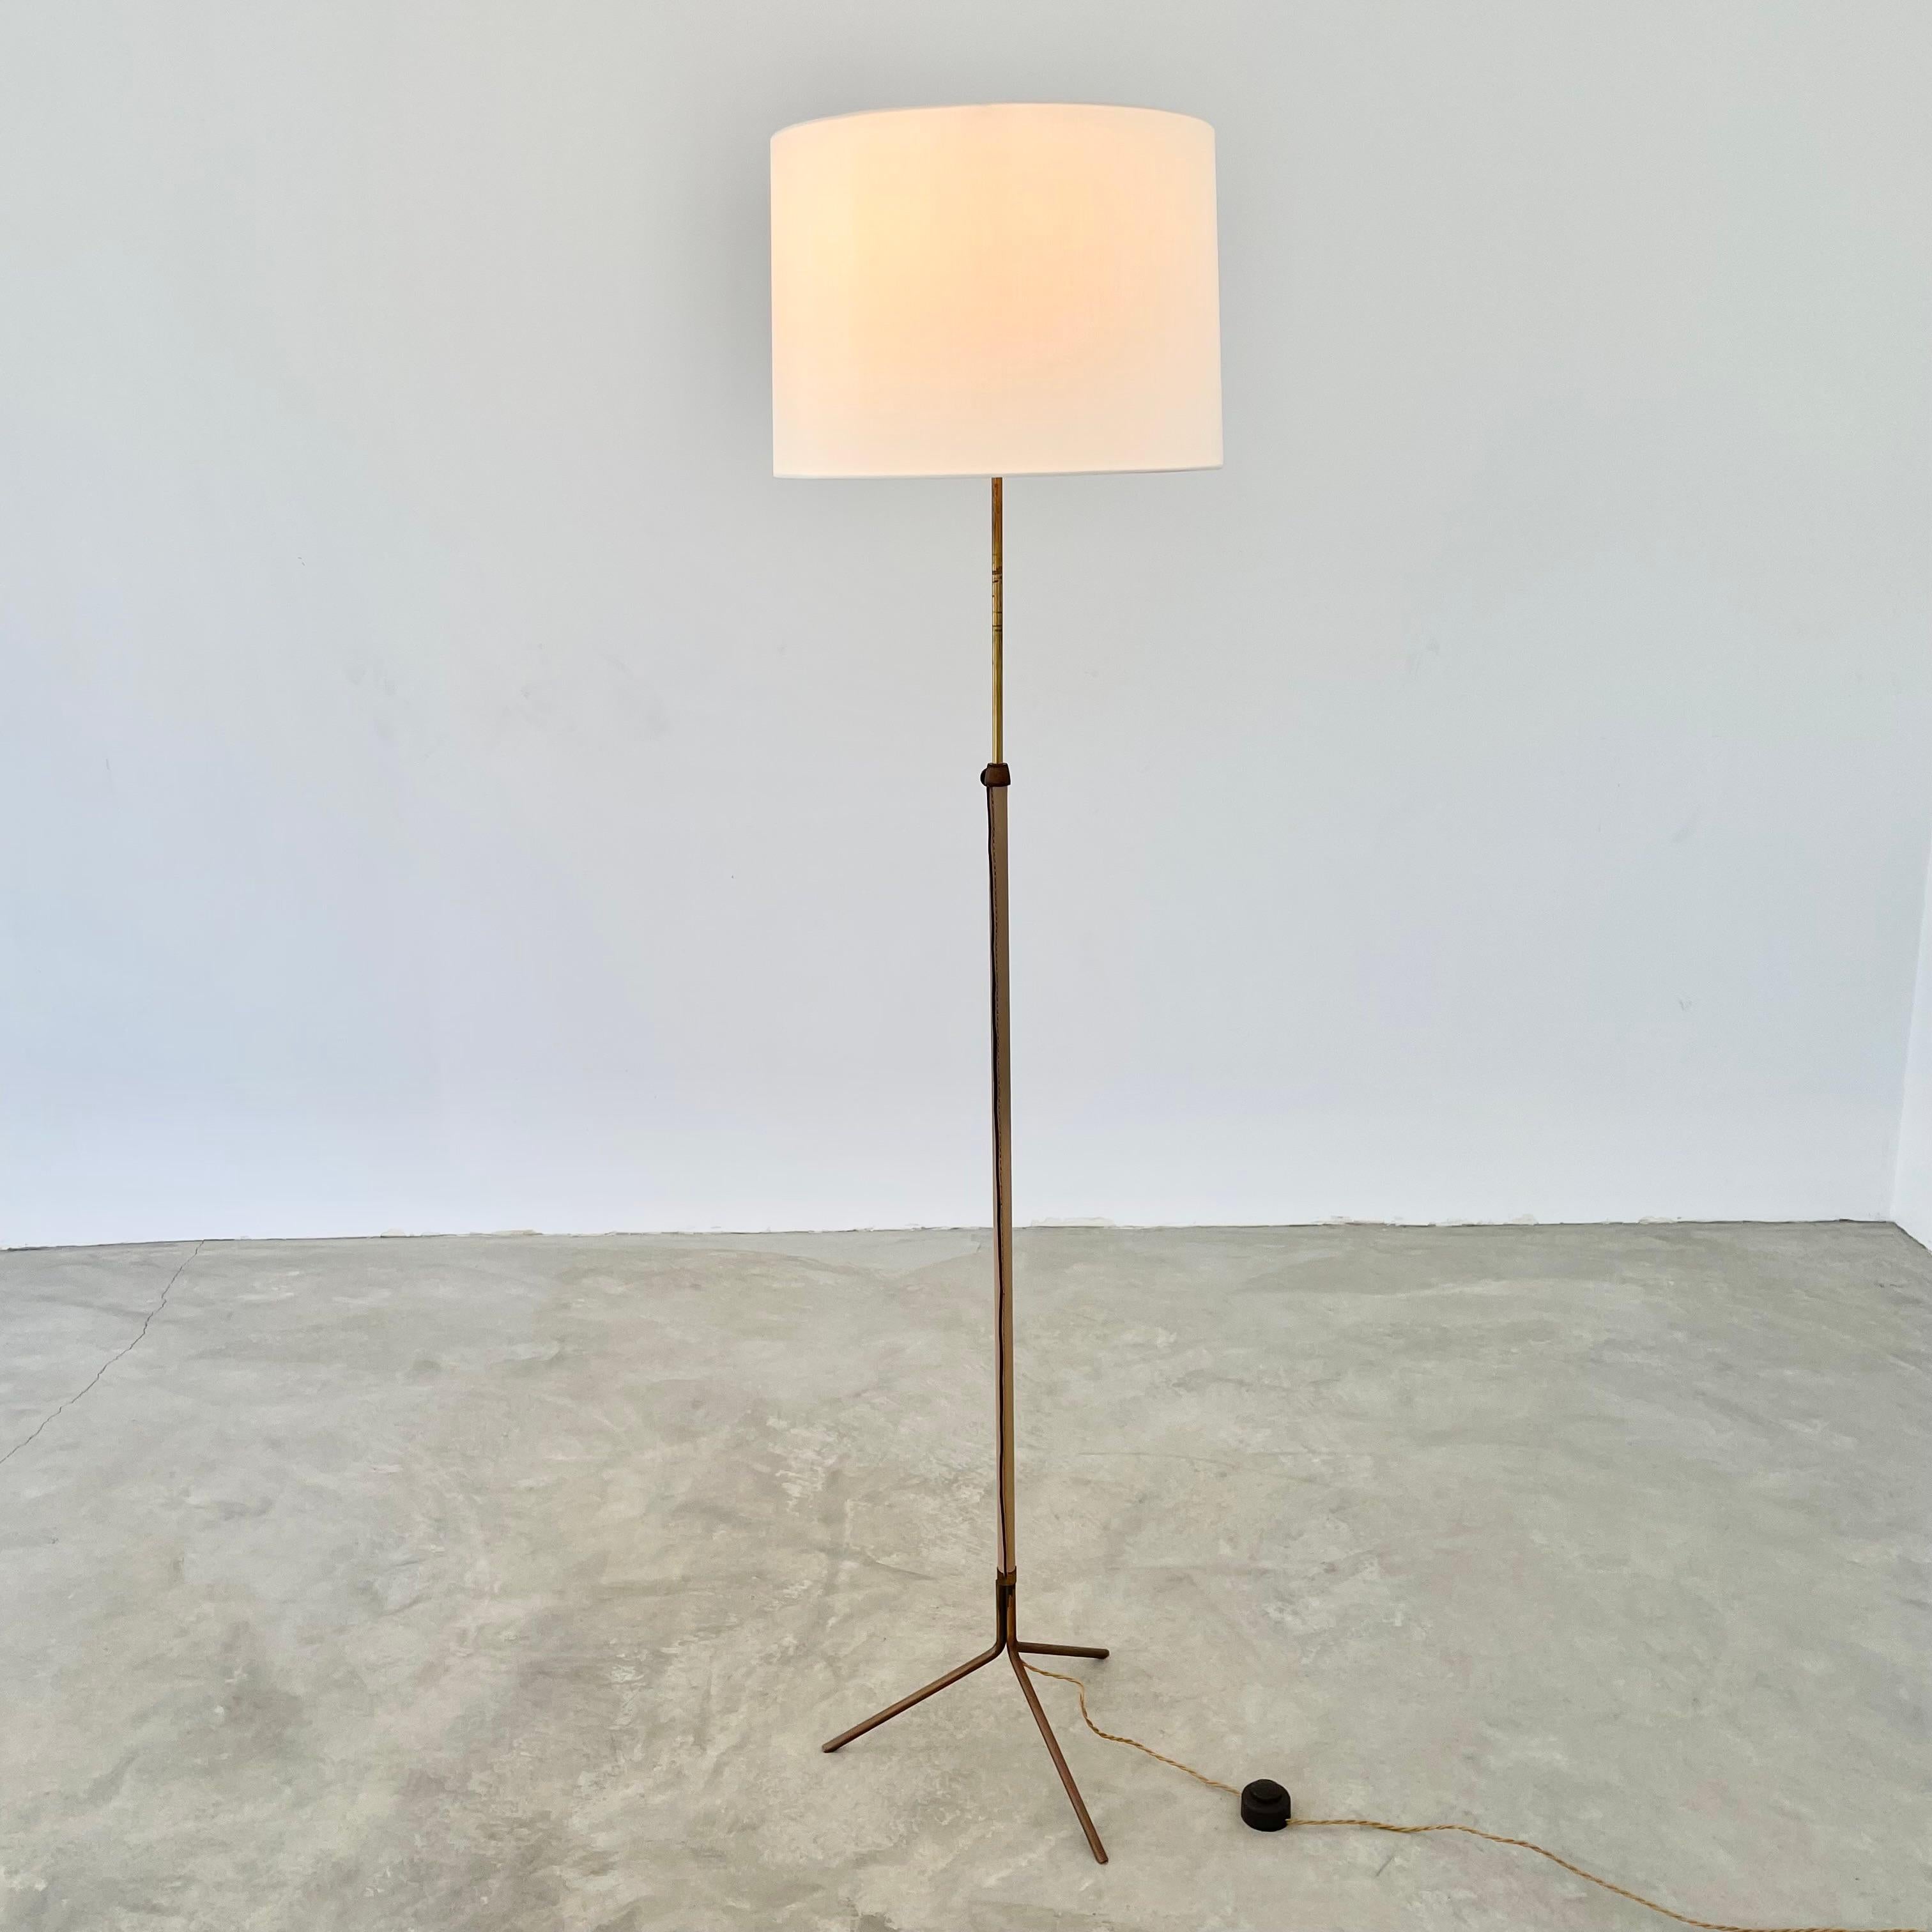 Handsome brass and leather floor lamp in the style of French designer Jacques Adnet. Vers les années 1950. Beige leather wrapping the full length of lamp. Height adjustable brass rod runs inside. Signature Adnet contrast stitching. Lamp has been